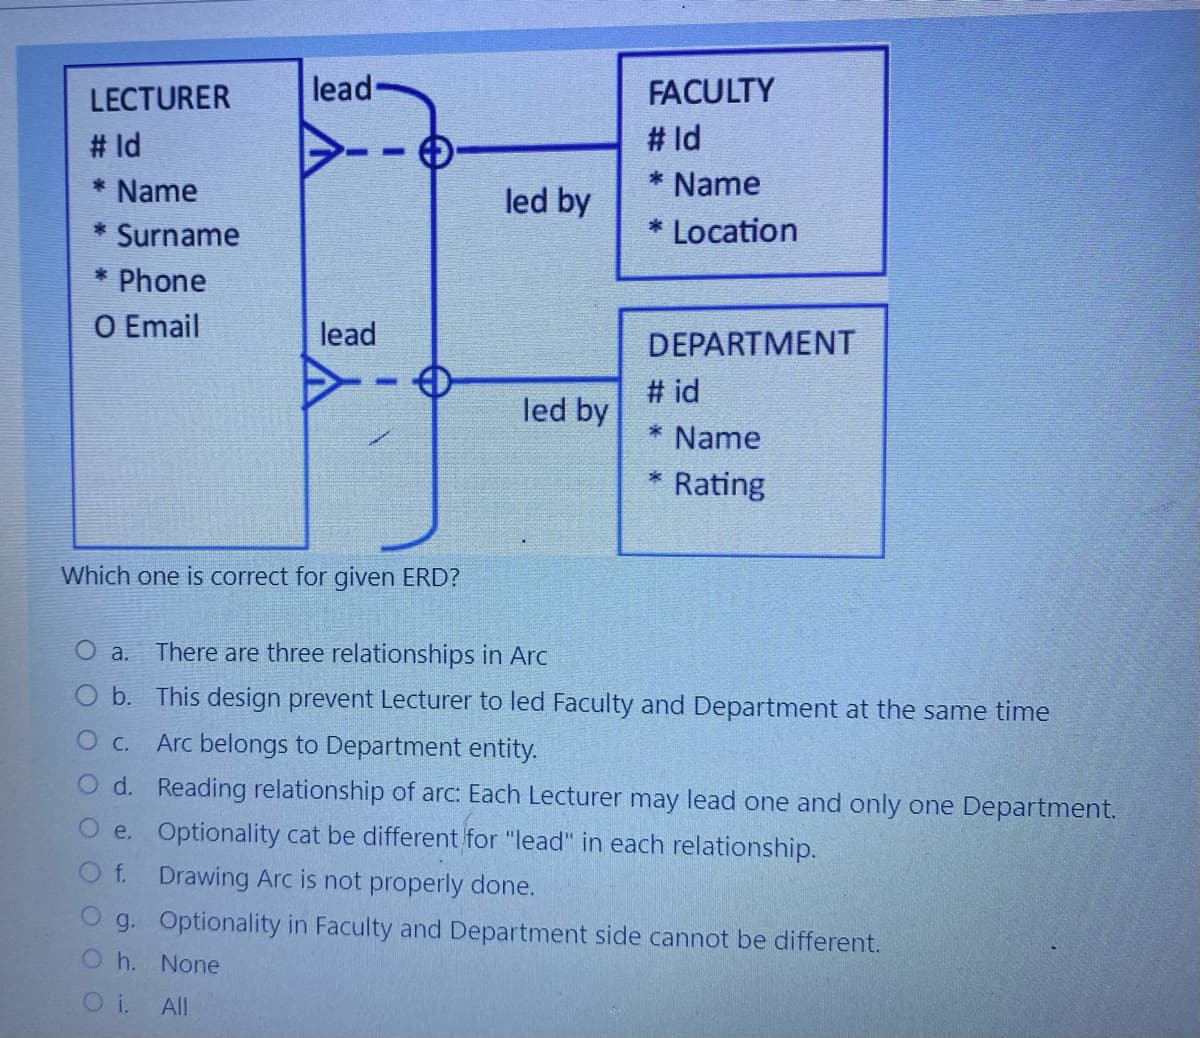 LECTURER
#ld
* Name
* Surname
* Phone
O Email
lead-
lead
g.
Oh. None
O i. All
-
Which one is correct for given ERD?
led by
led by
FACULTY
# Id
* Name
* Location
DEPARTMENT
# id
* Name
* Rating
O a. There are three relationships in Arc
O b. This design prevent Lecturer to led Faculty and Department at the same time
O c.
Arc belongs to Department entity.
O d.
Reading relationship of arc: Each Lecturer may lead one and only one Department.
Optionality cat be different for "lead" in each relationship.
O e.
O f.
Drawing Arc is not properly done.
Optionality in Faculty and Department side cannot be different.